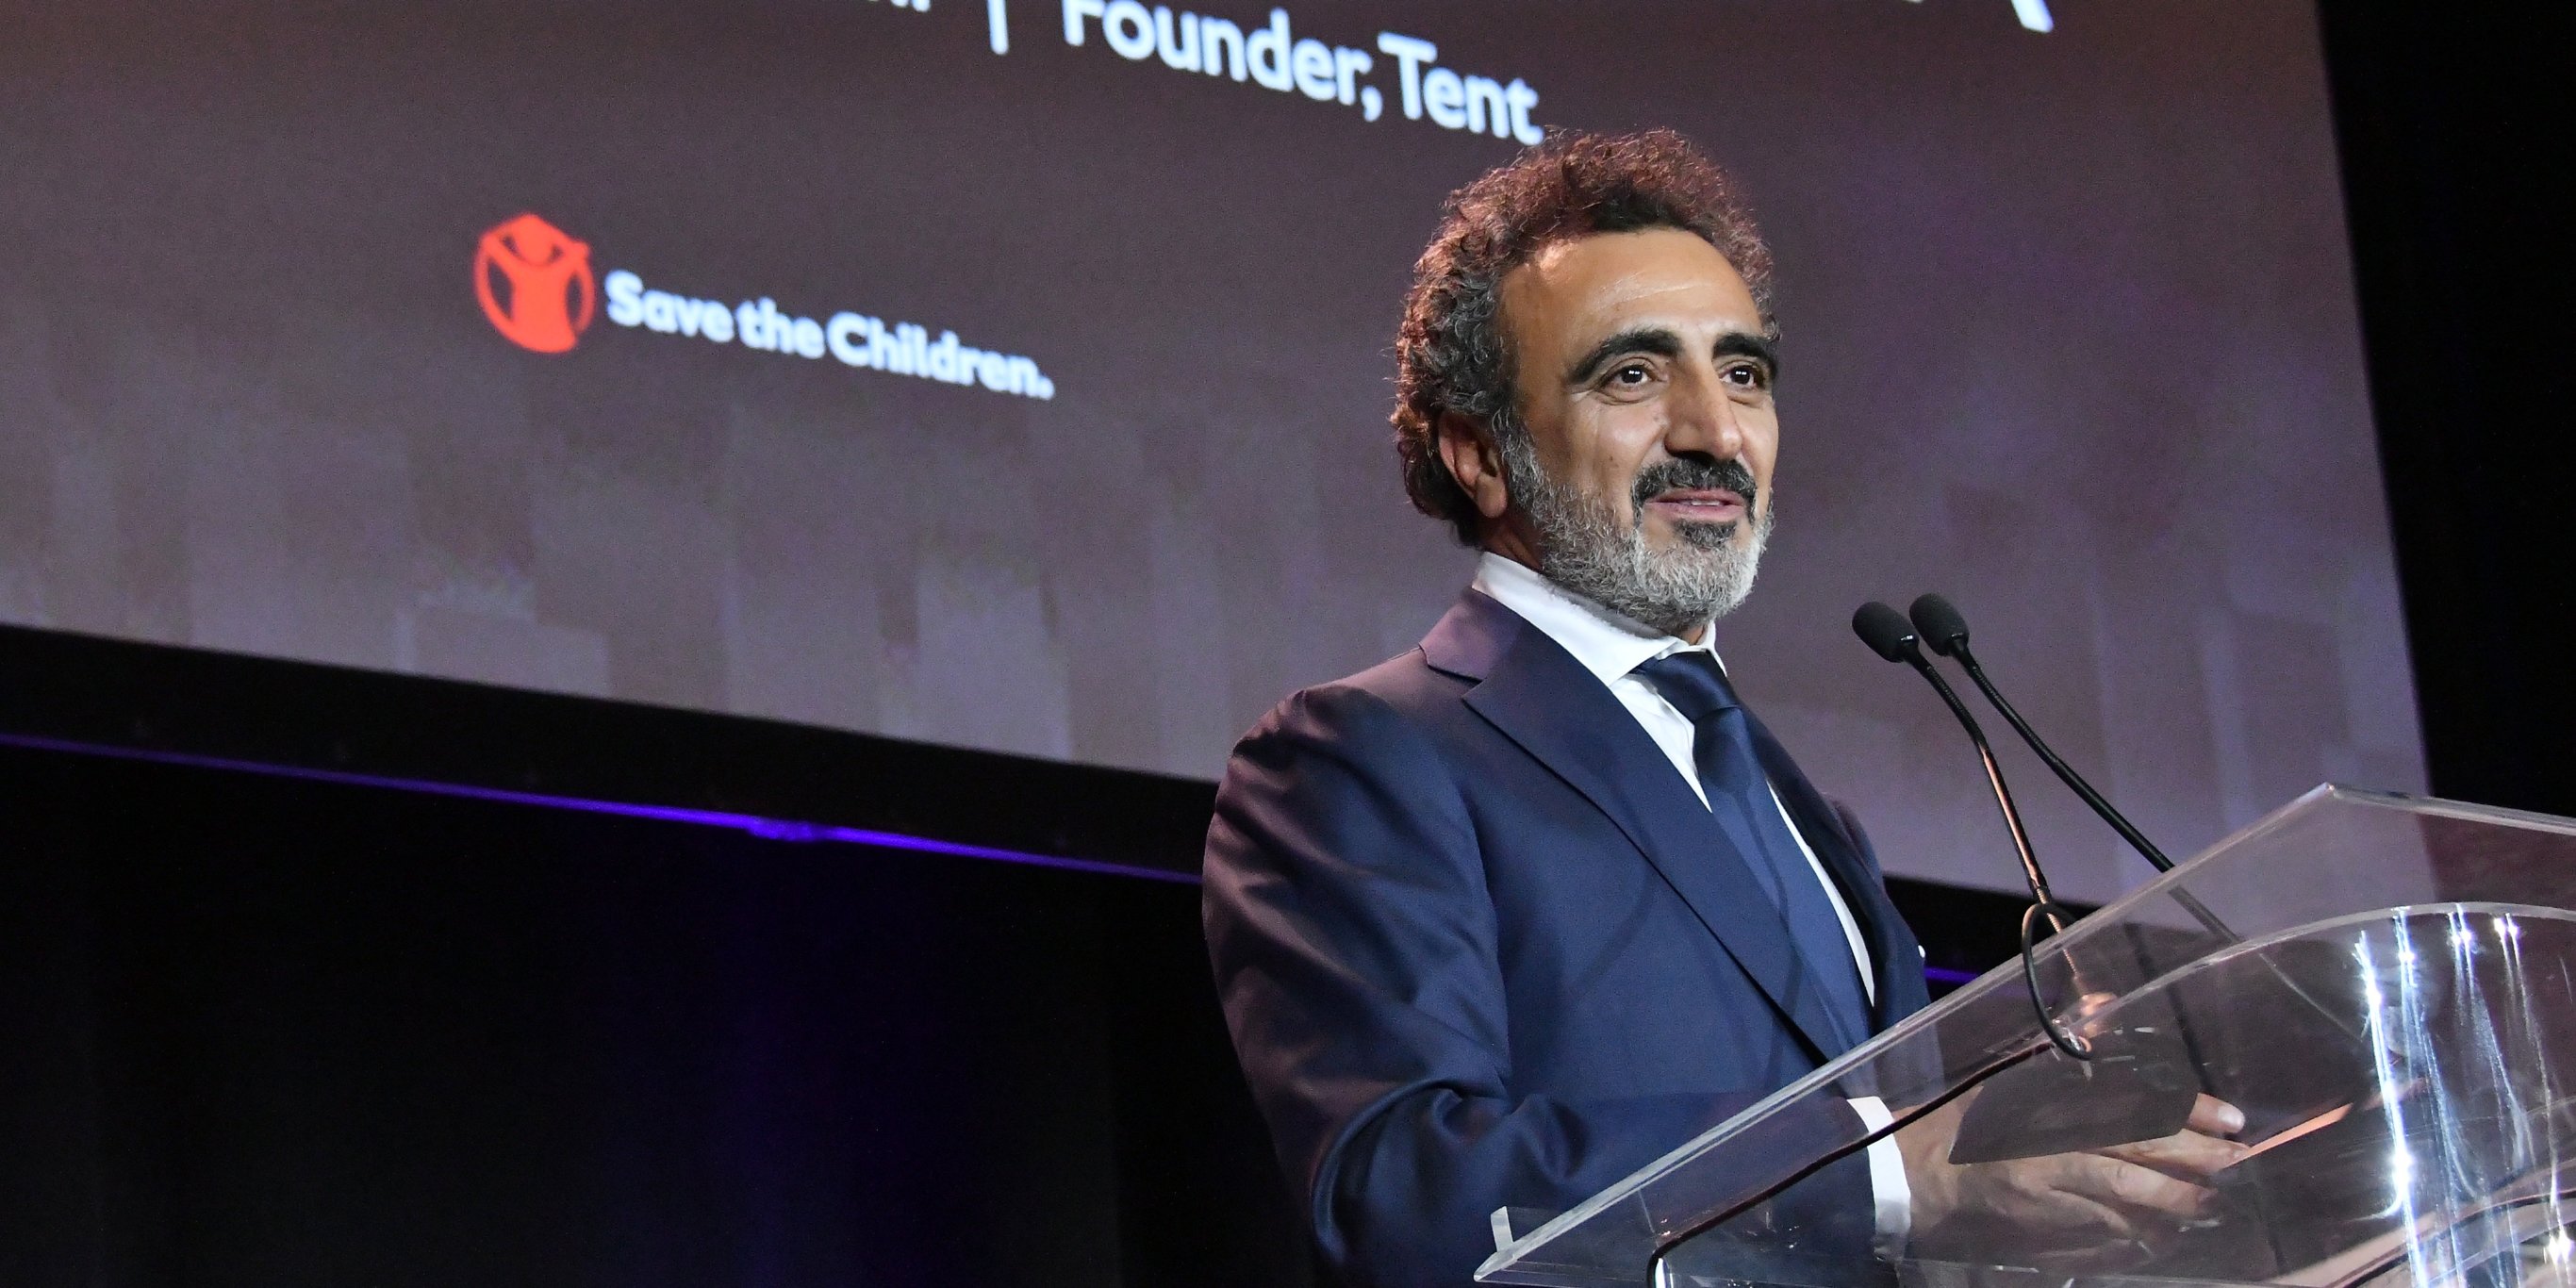 The Chobani billionaire who turned a $3,000 loan into a yogurt empire says CEOs don’t actually report to the board — they report to the consumer